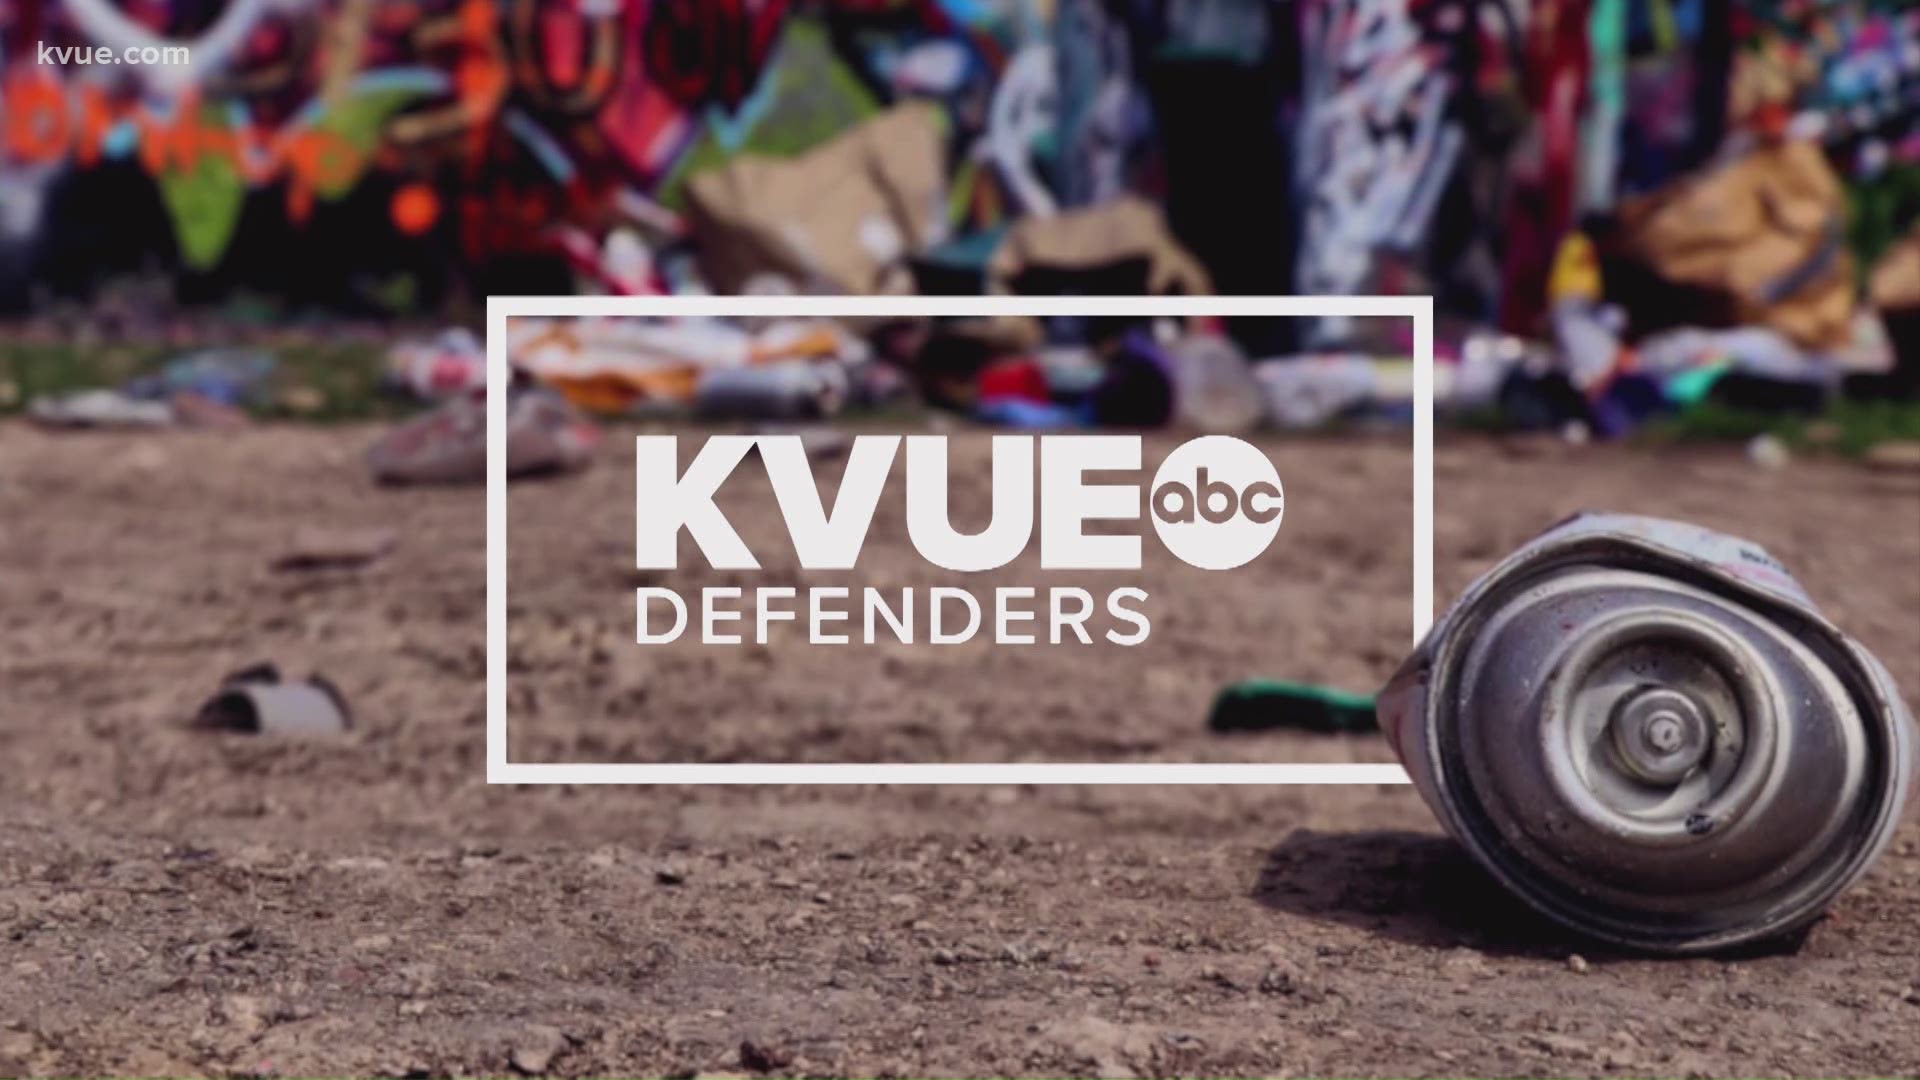 From furloughs to flyovers, the KVUE Defenders are answering your COVID-19 questions.